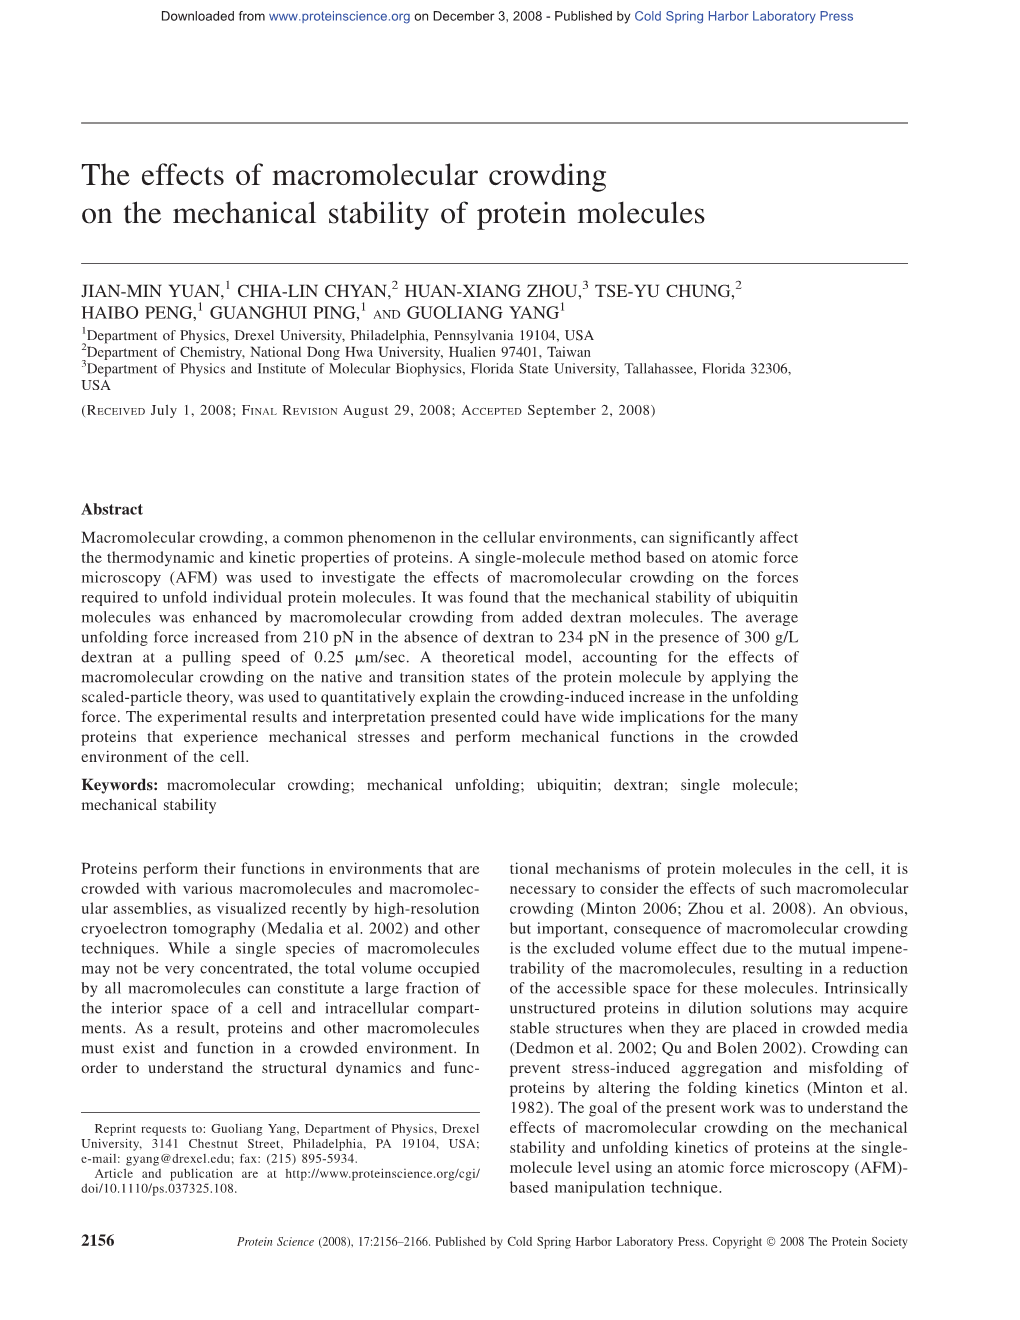 The Effects of Macromolecular Crowding on the Mechanical Stability of Protein Molecules